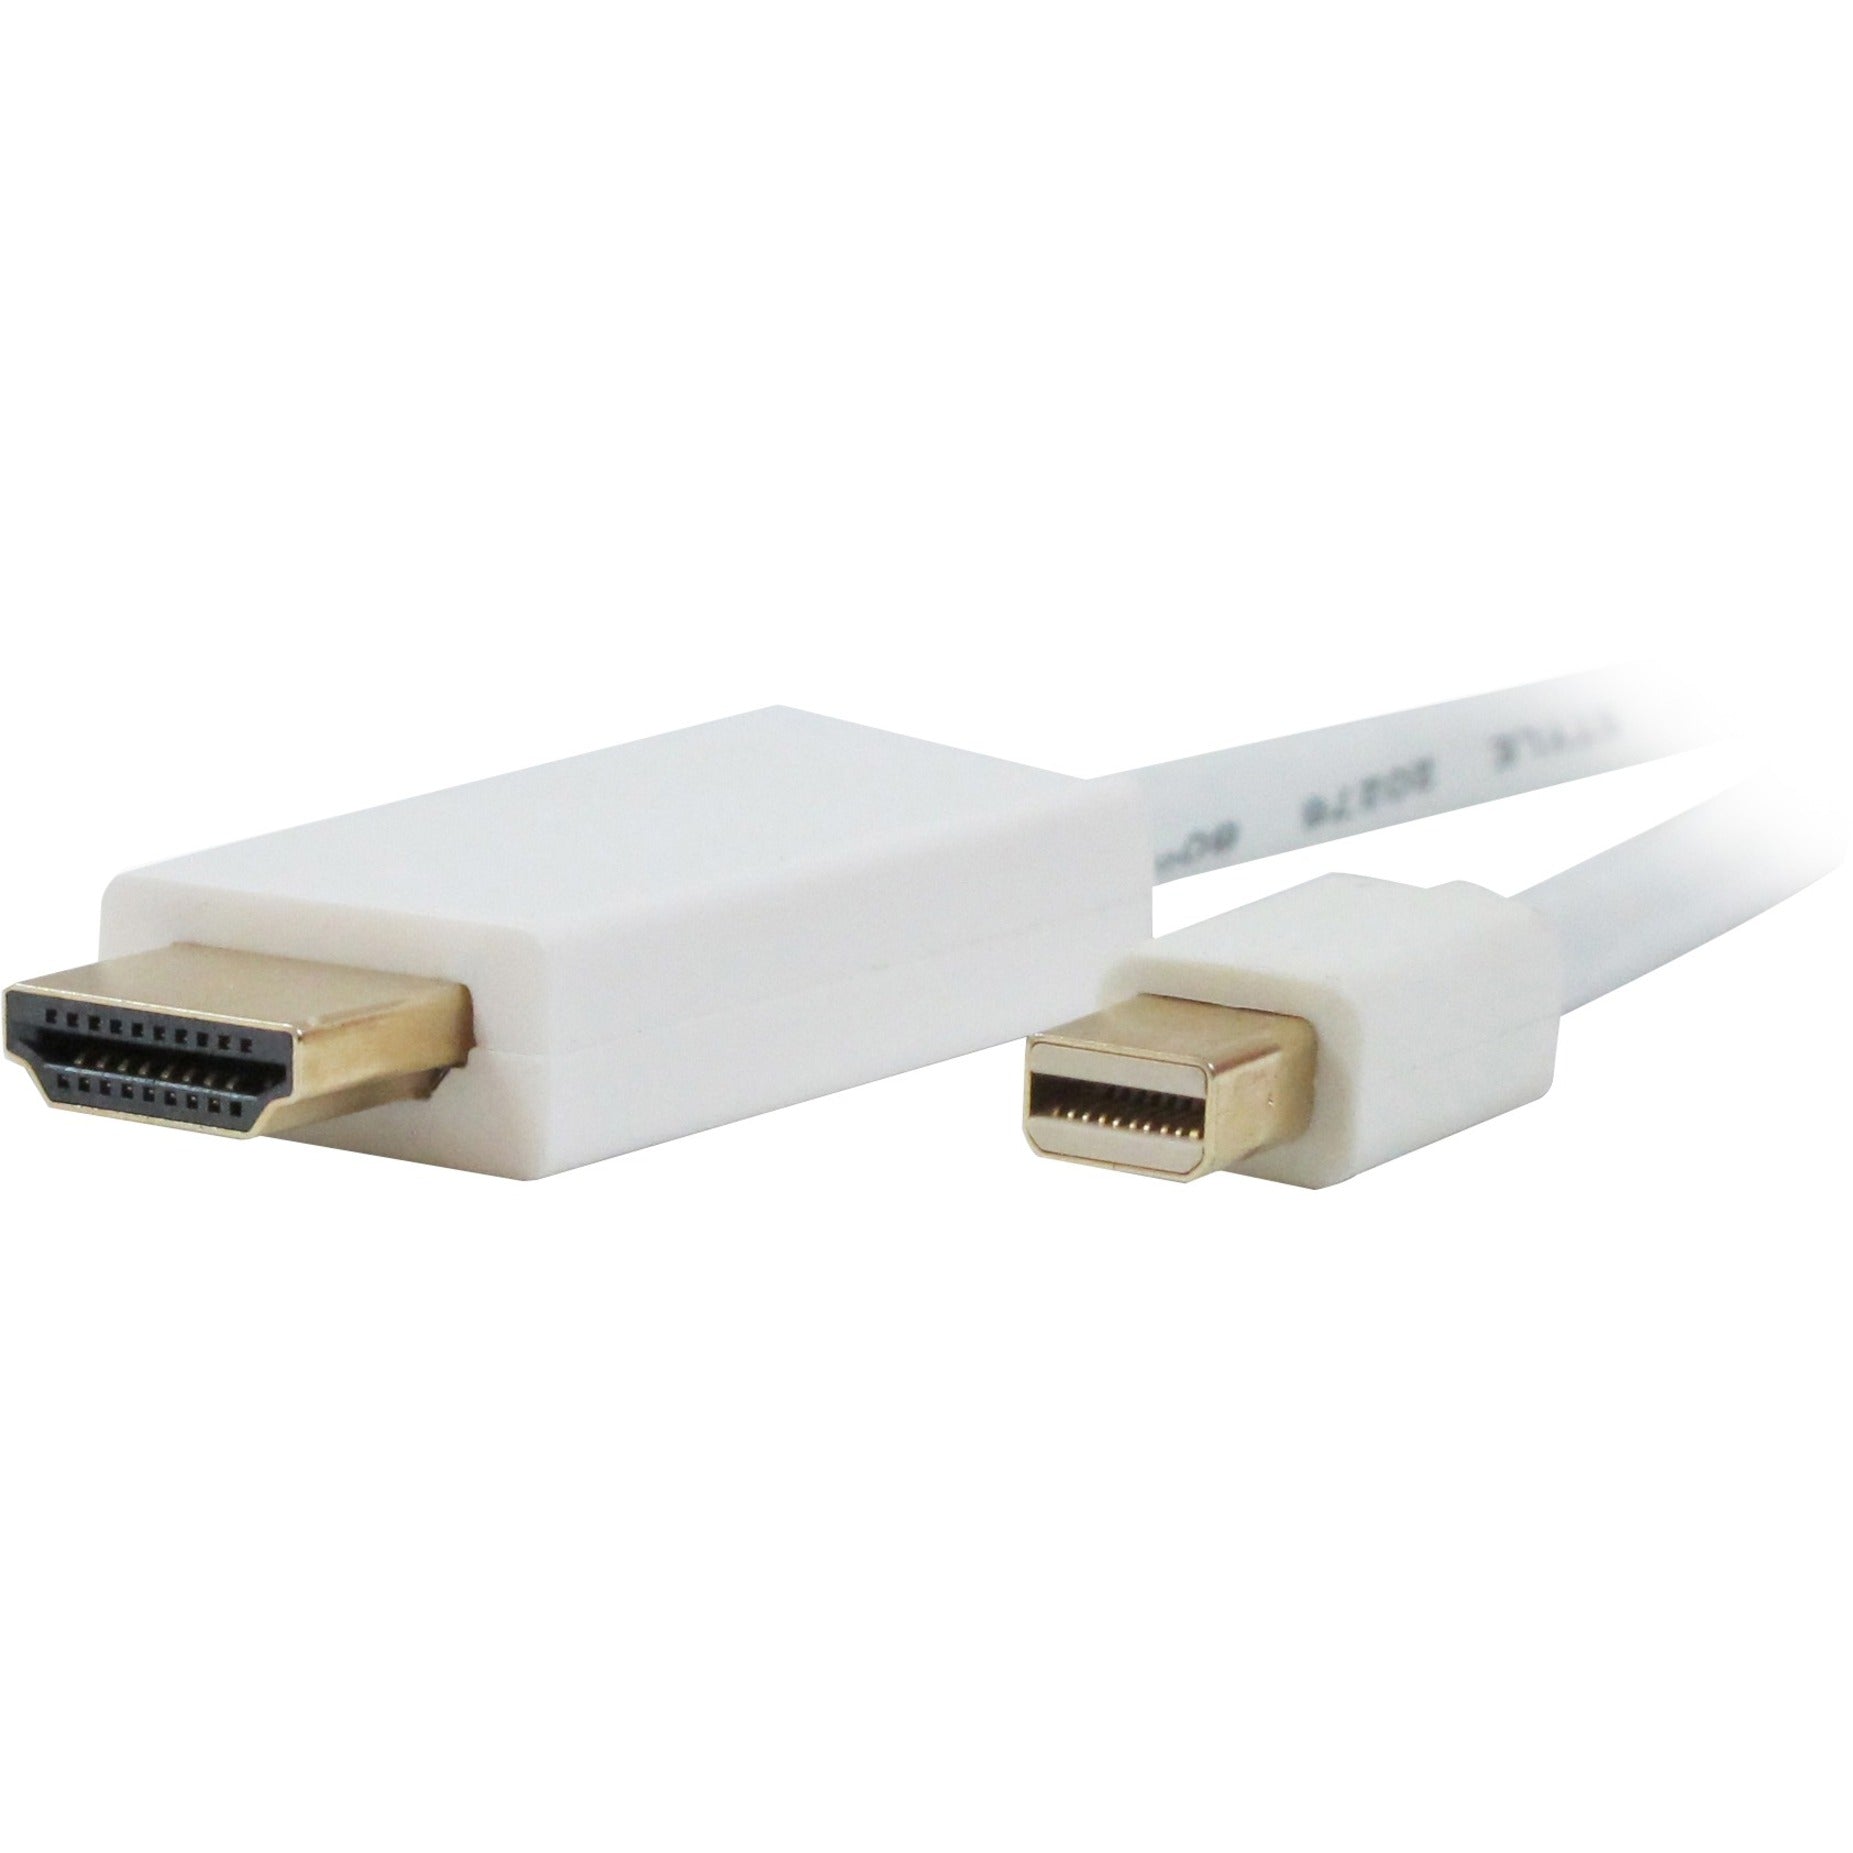 Comprehensive MDP-HD-3ST Mini DisplayPort Male to HDMI Male Cable 3ft, High-Speed Data Transfer, Lifetime Warranty